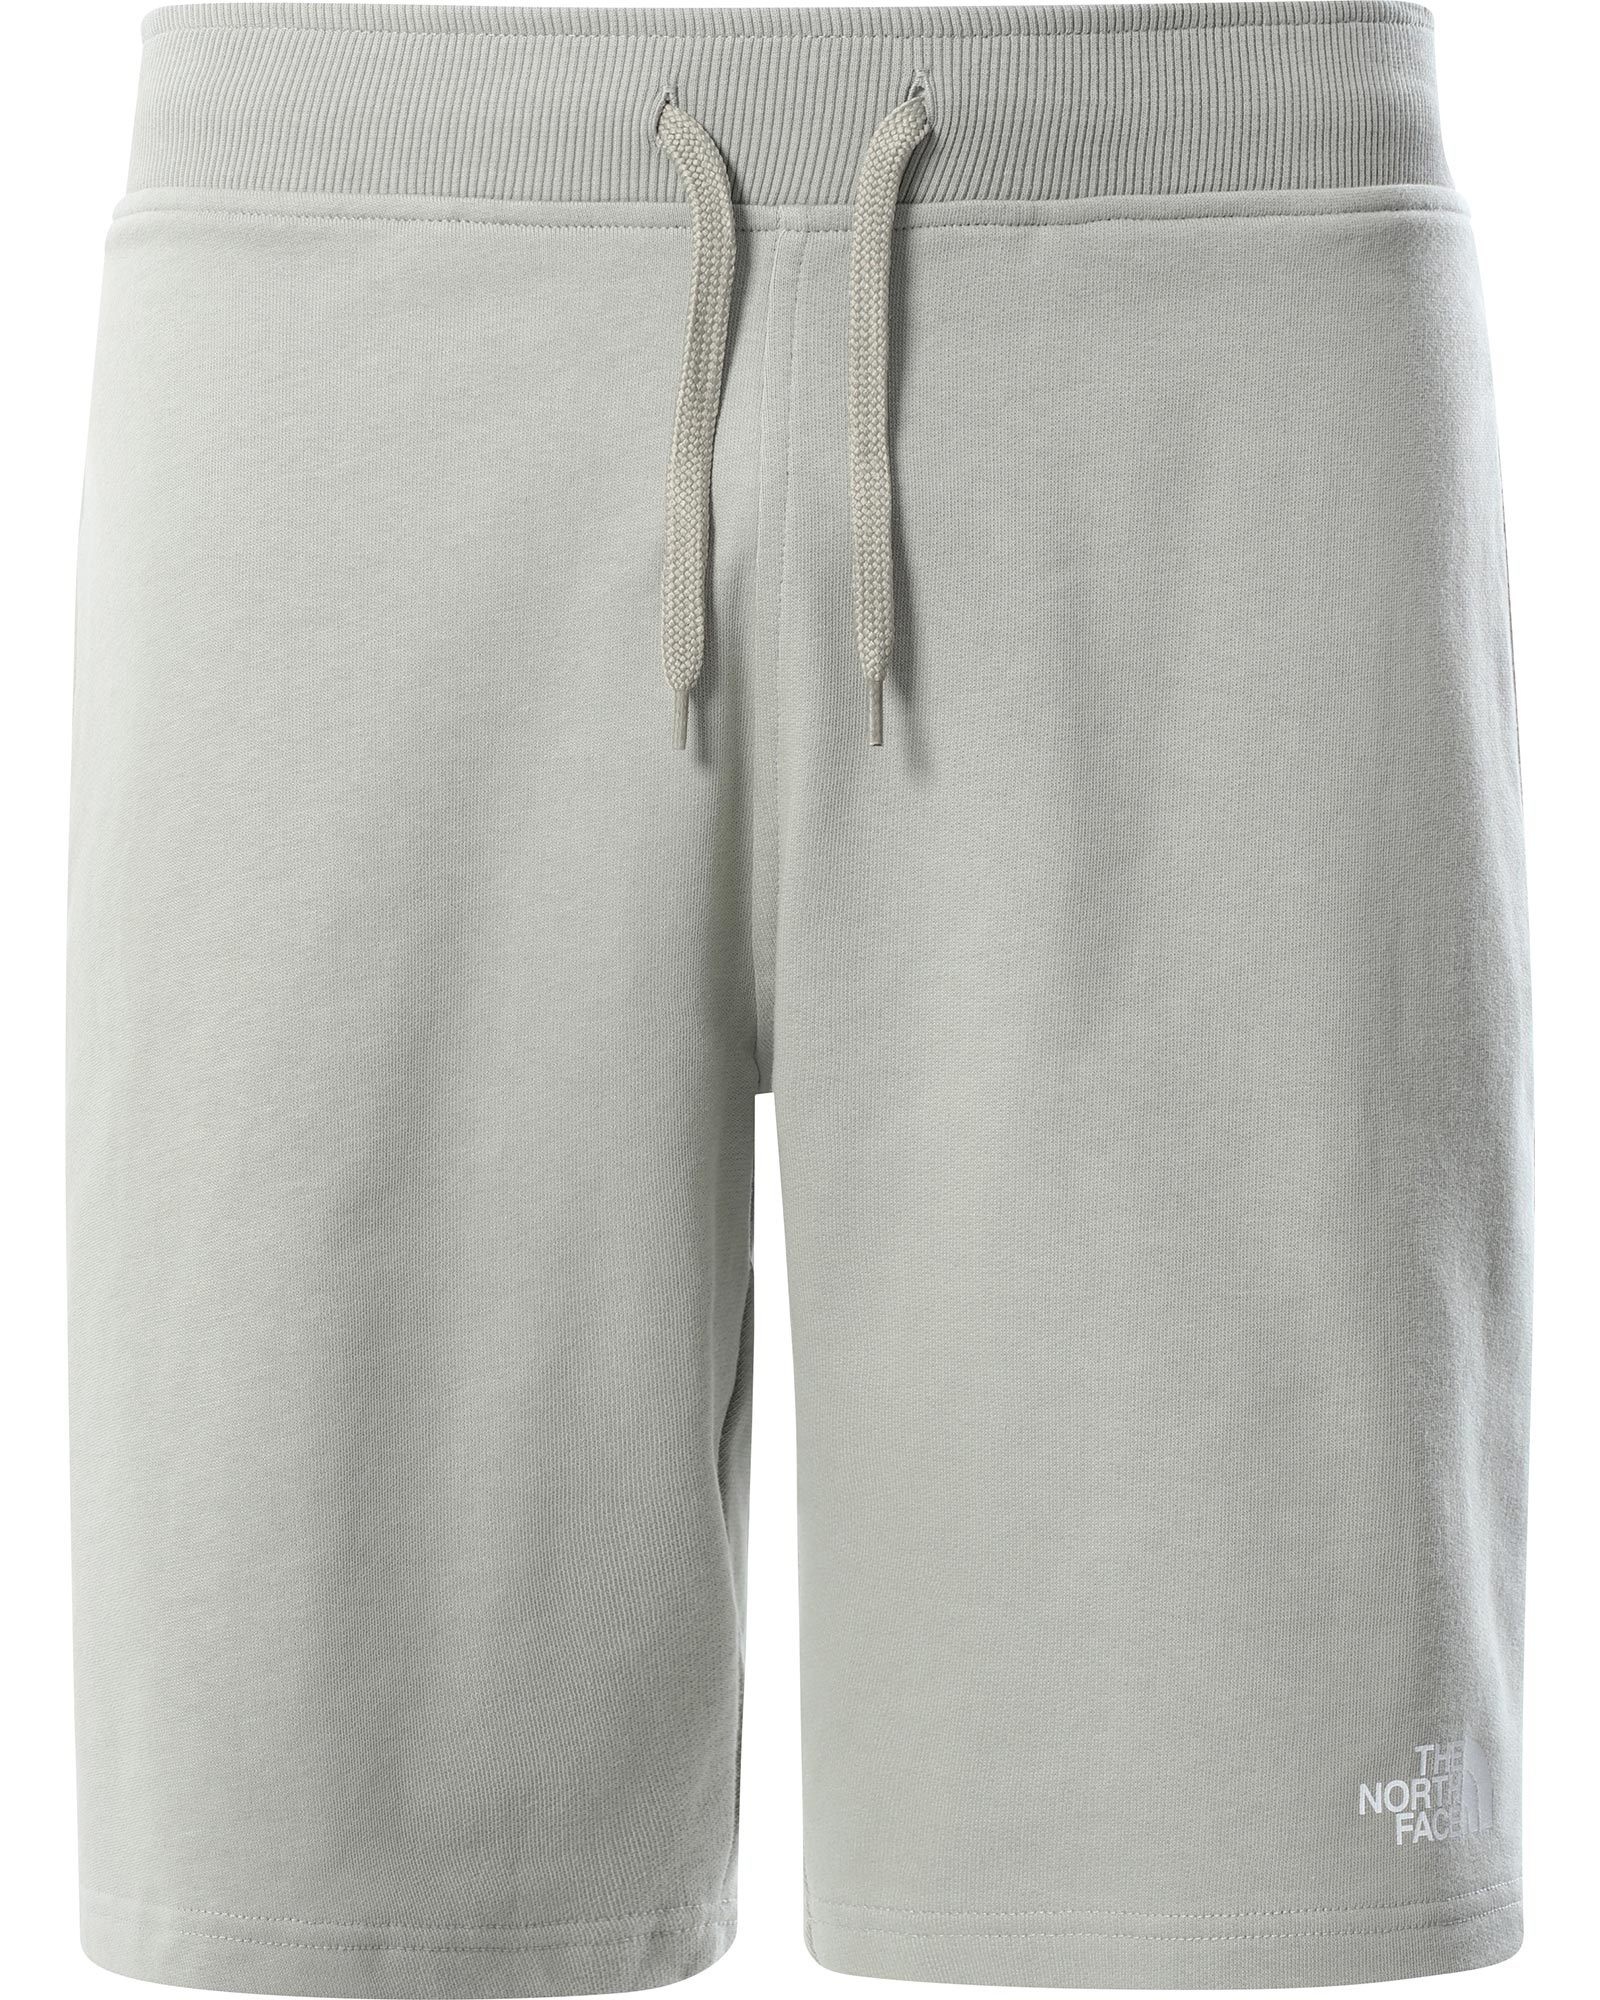 The North Face Std Light Men’s Shorts - Wrought Iron XS